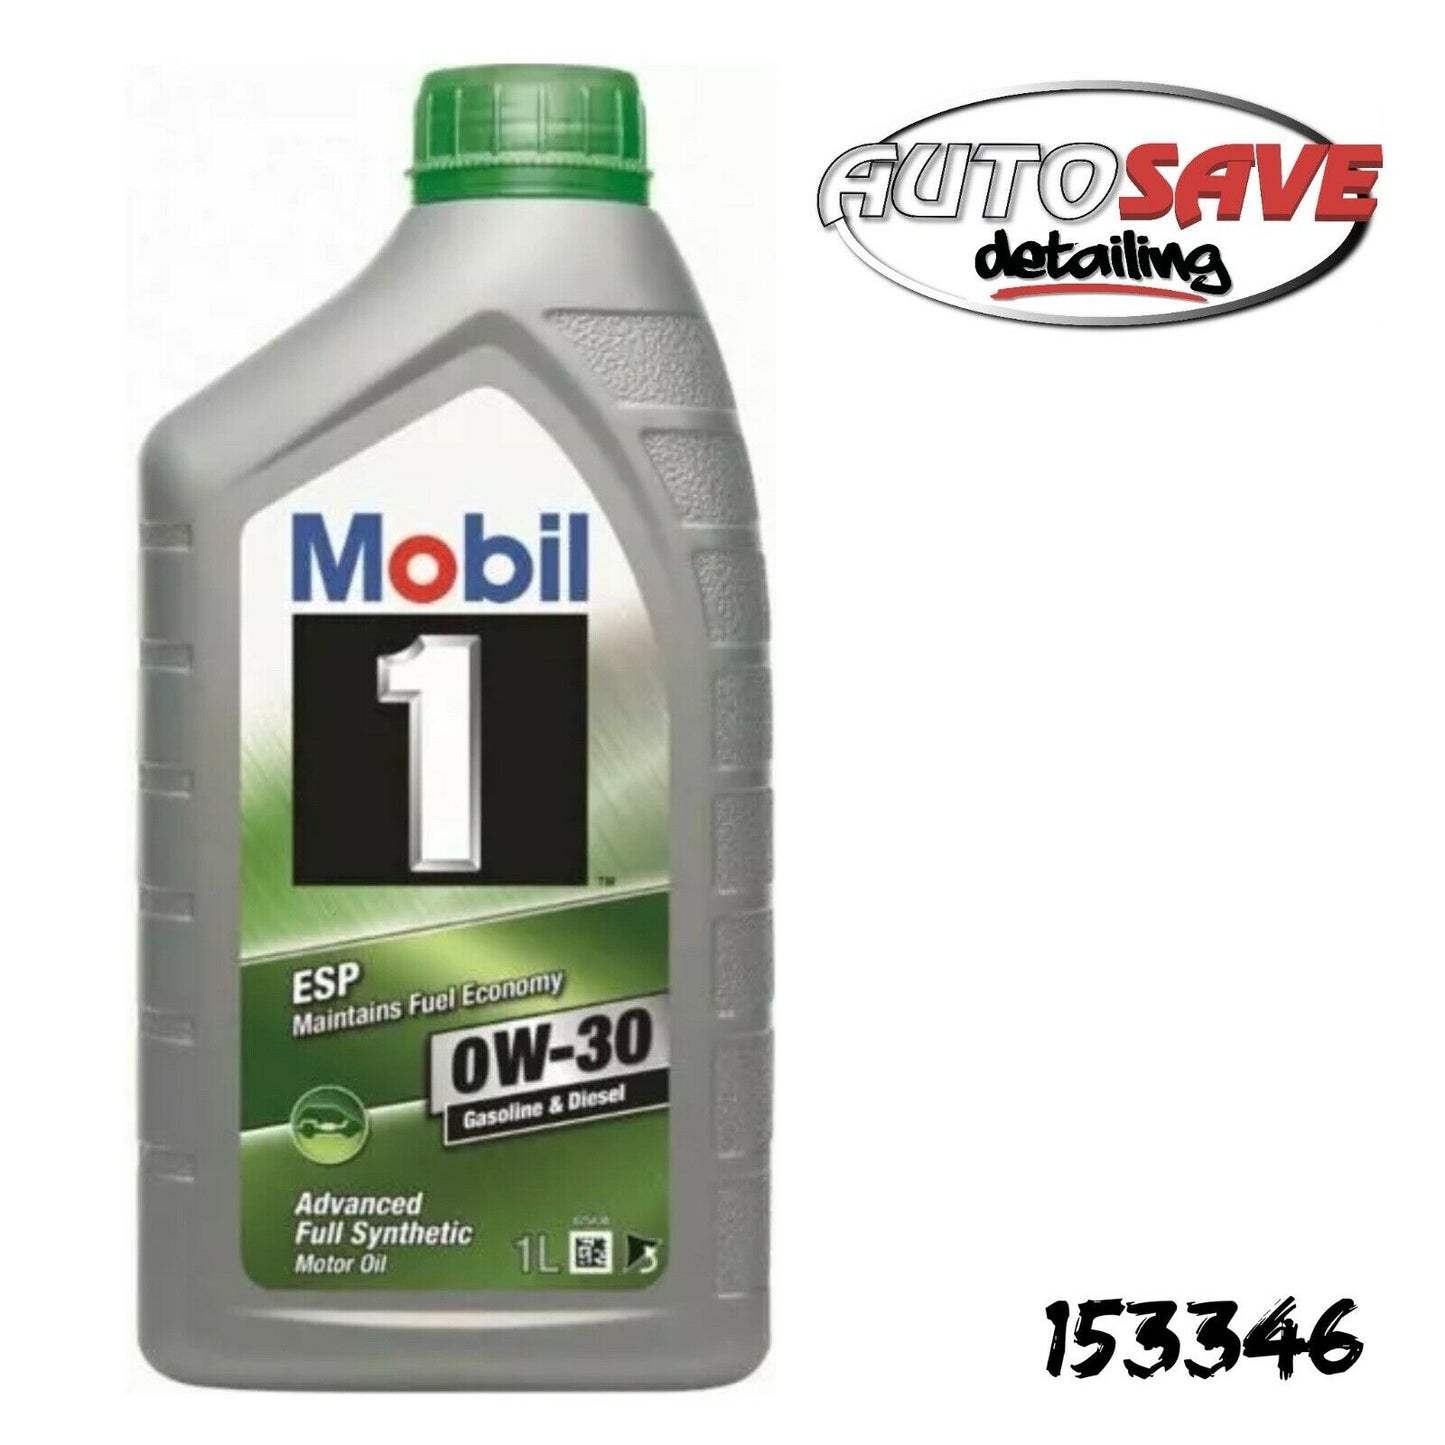 Mobil 1 ESP 0W30 Full Synthetic High Performance Car Engine Oil - 1 Litre